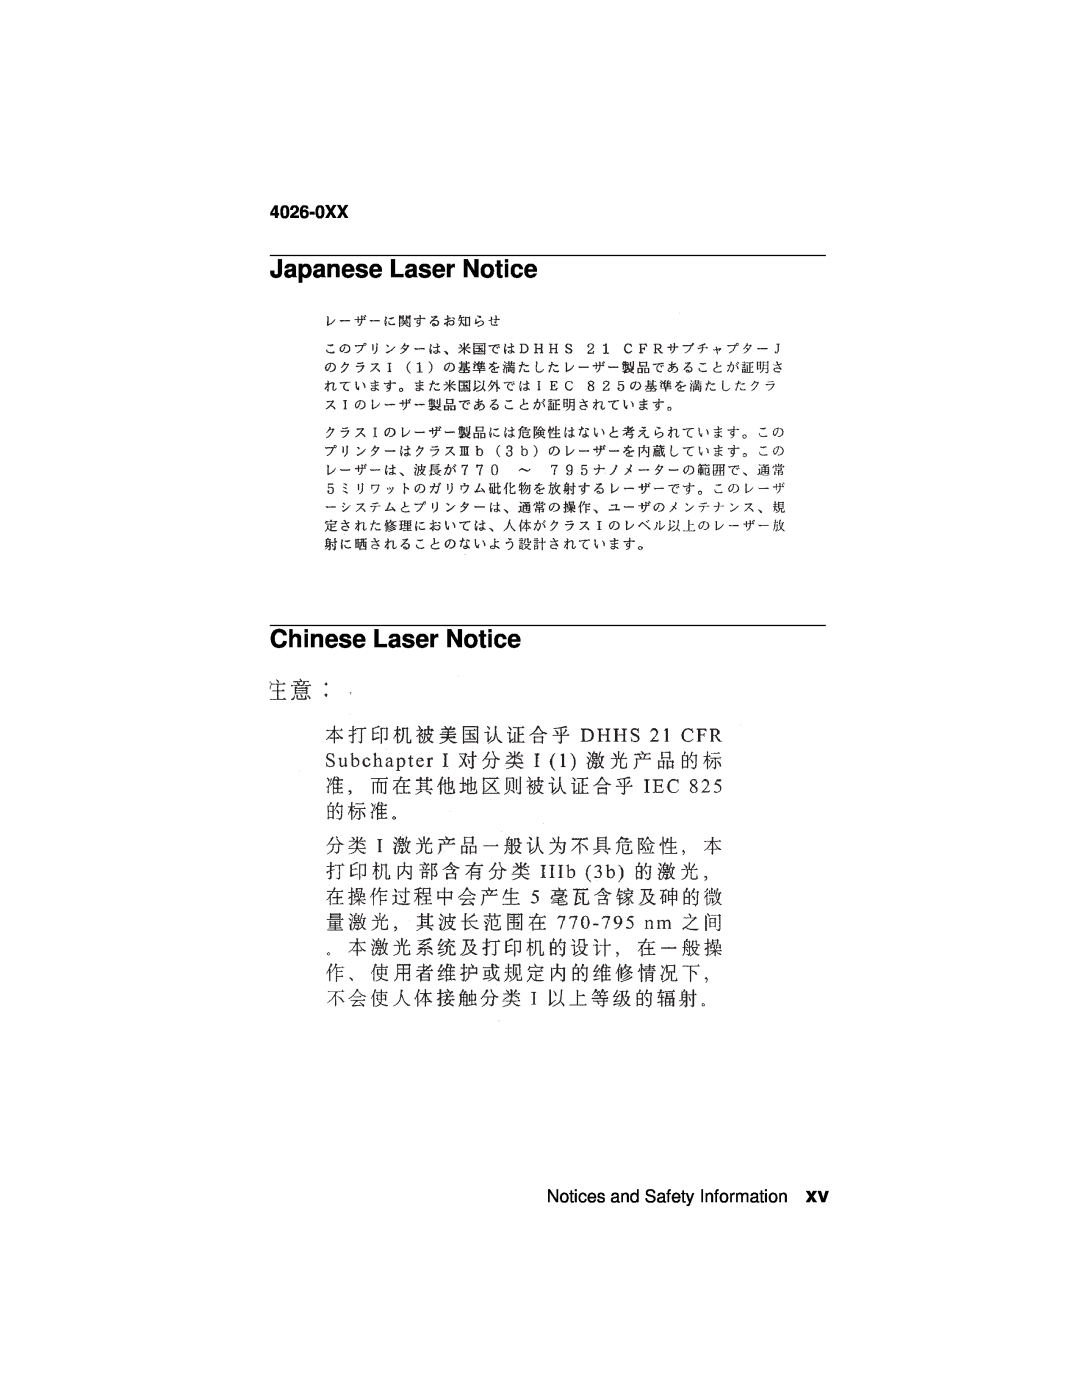 Lexmark 4026-0XX manual Japanese Laser Notice Chinese Laser Notice, Notices and Safety Information 